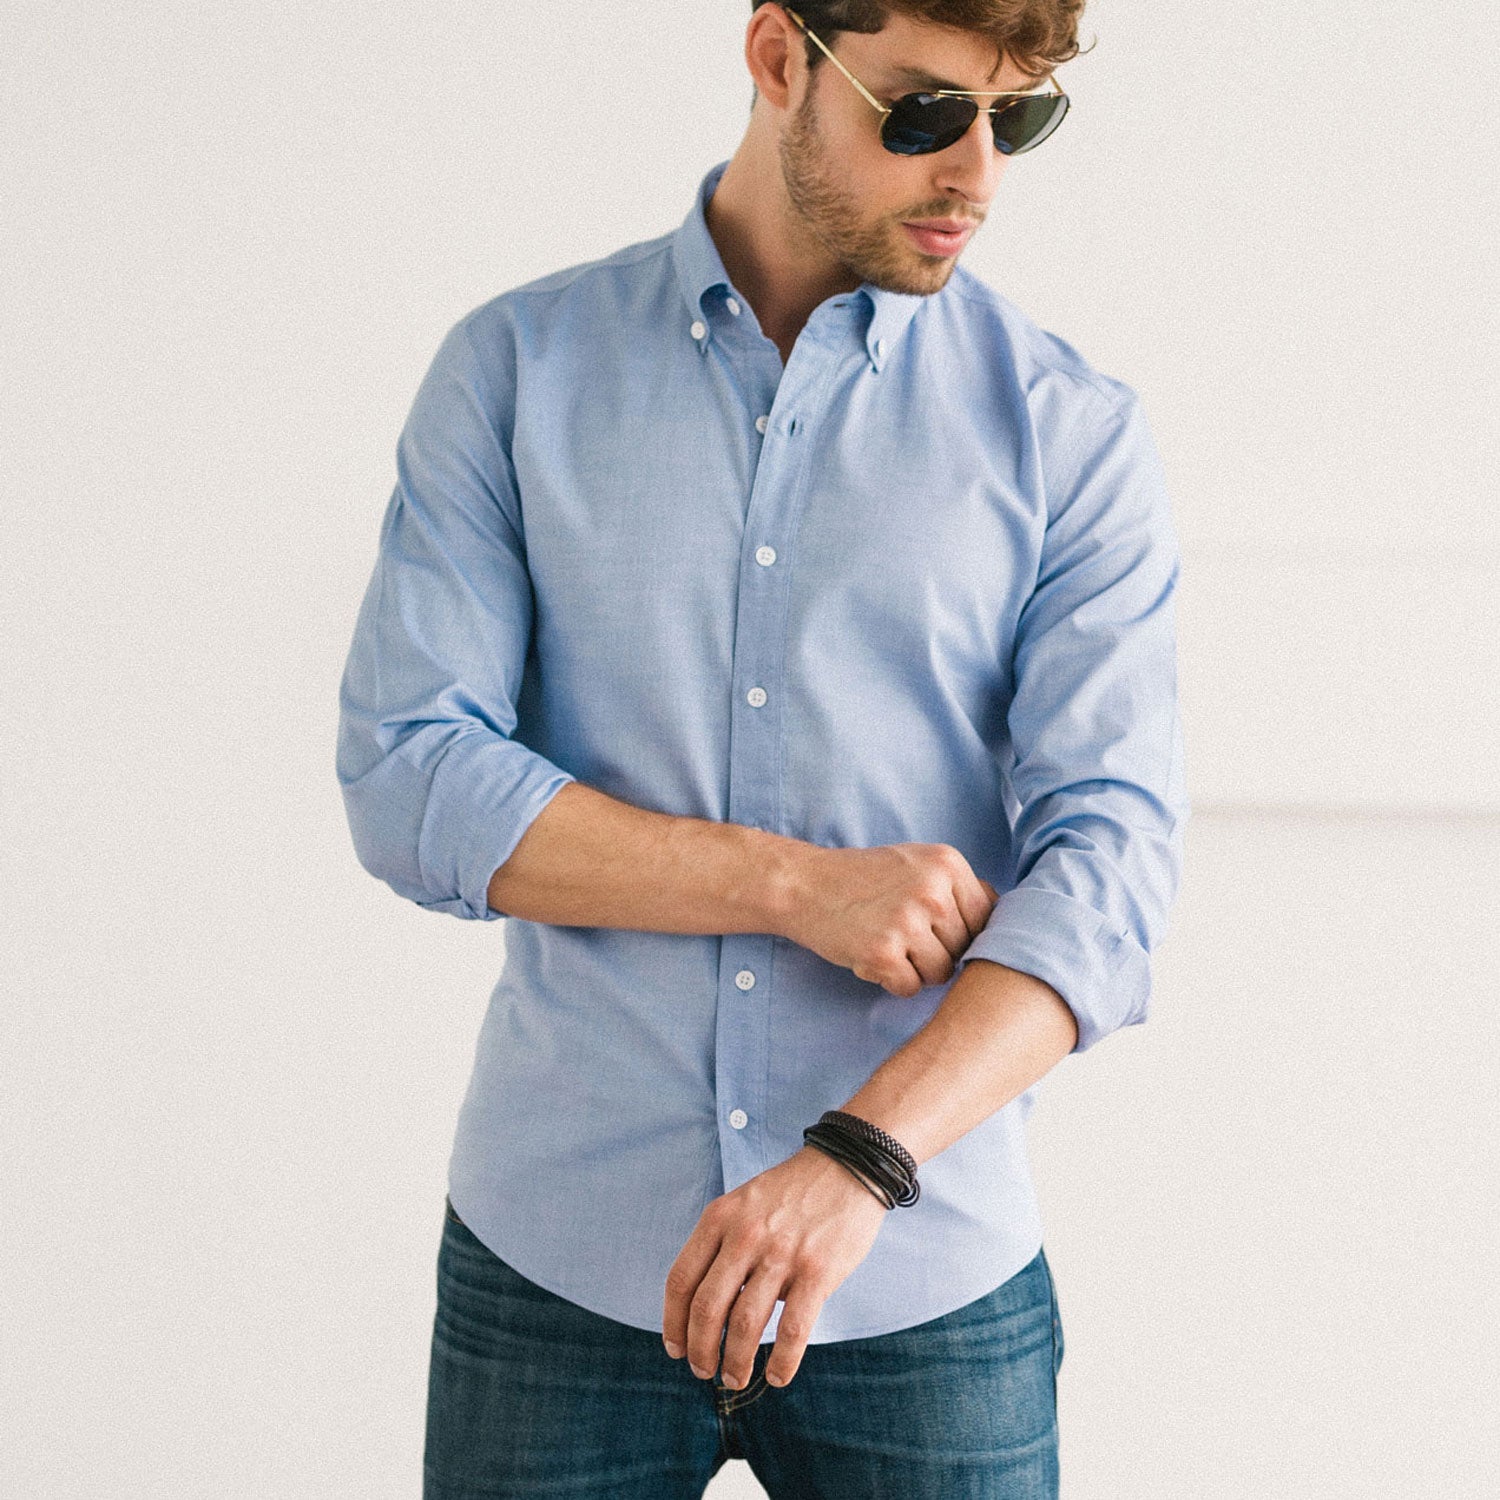 Five Types of Casual Button-Down Shirts You Need in Your Closet